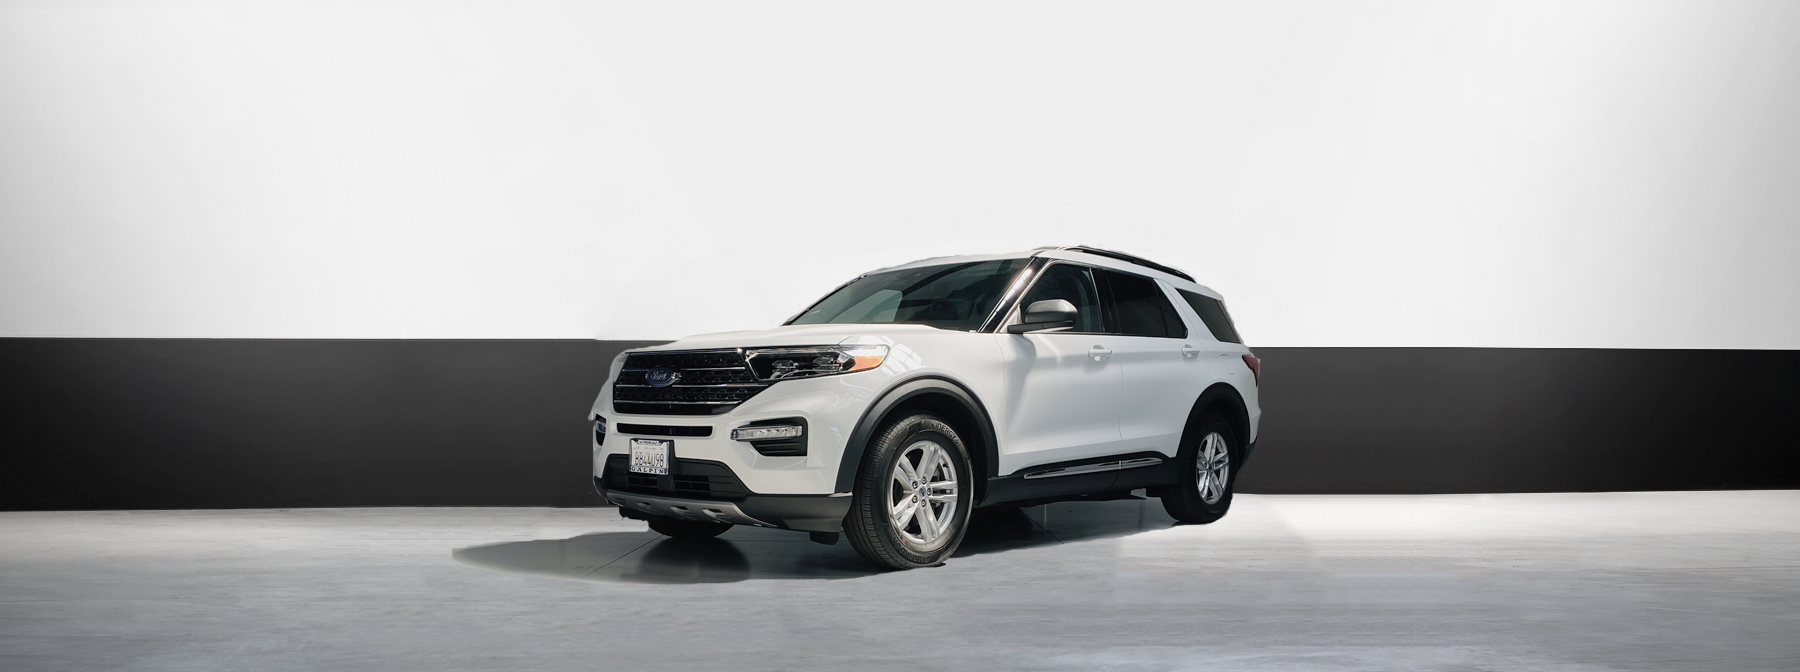 ford explorer in white luxury suv car rental in los angeles san francisco